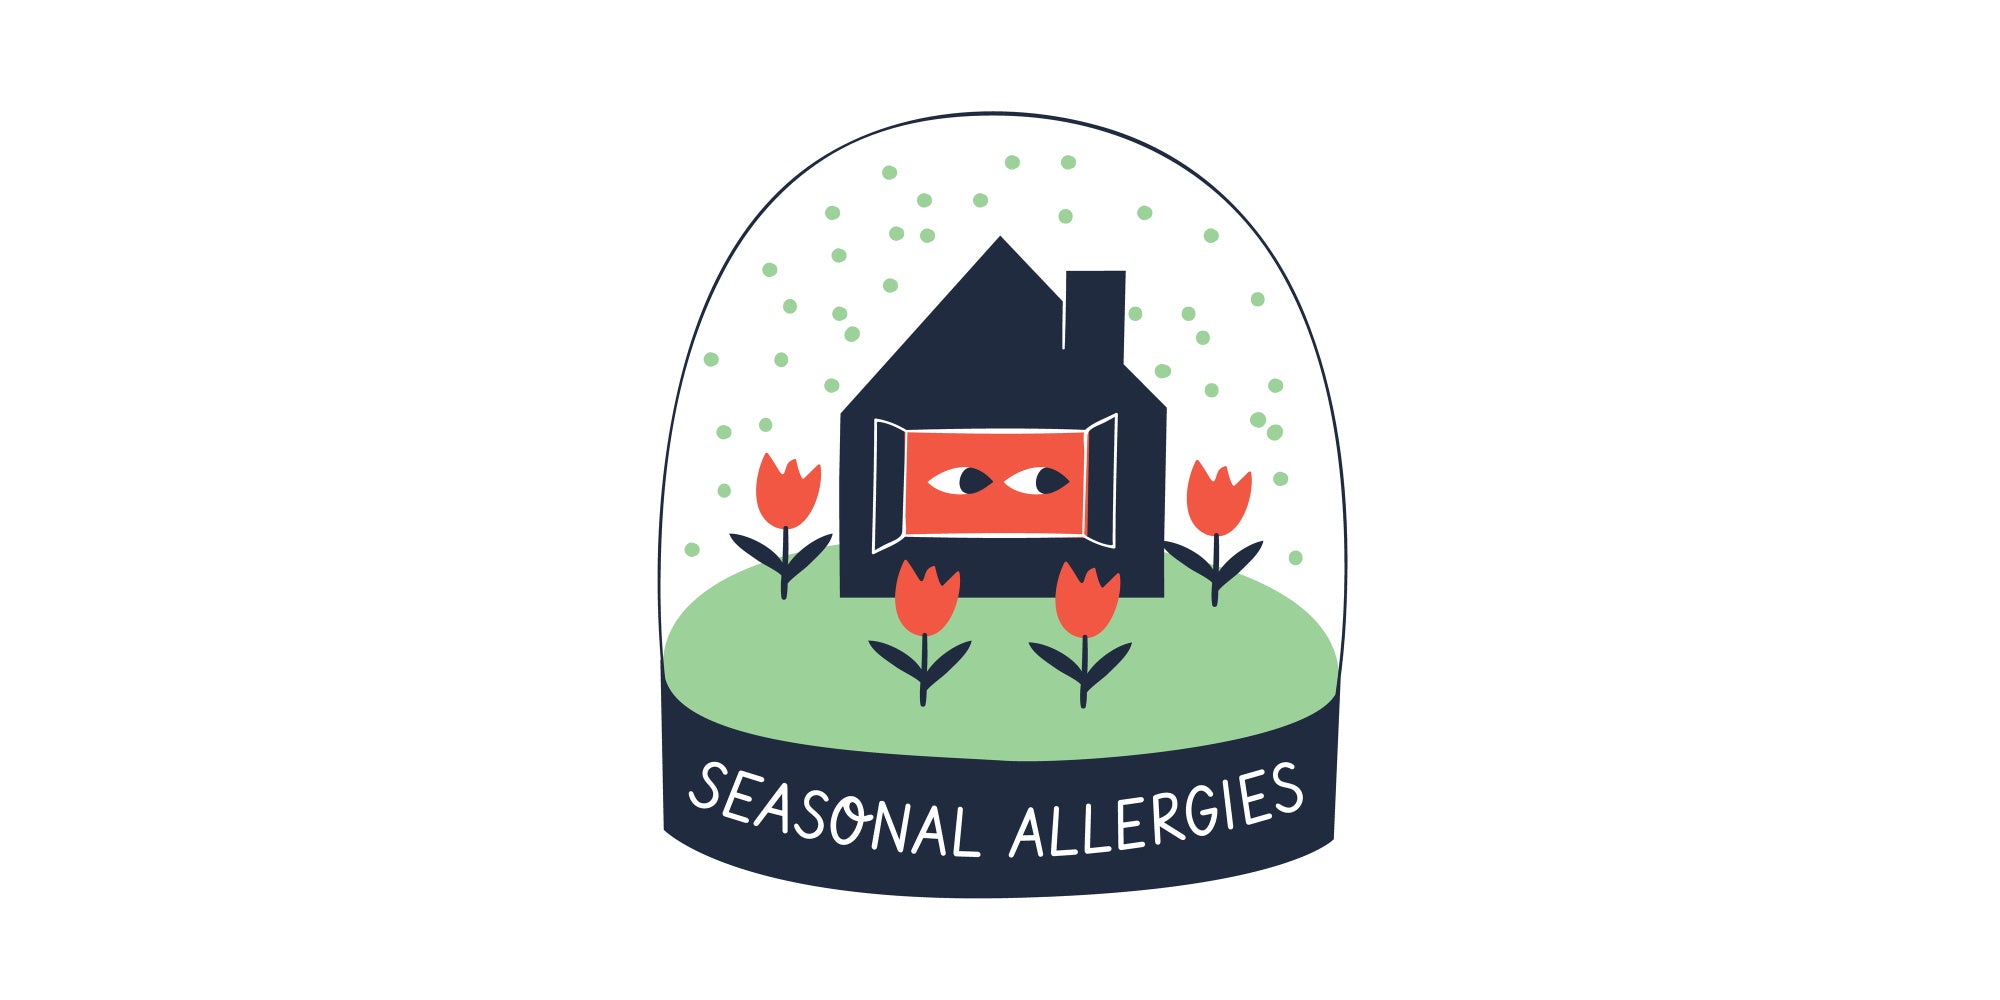 Graphic illustration of a house inside a springtime snow globe labeled 'Seasonal Allergies'